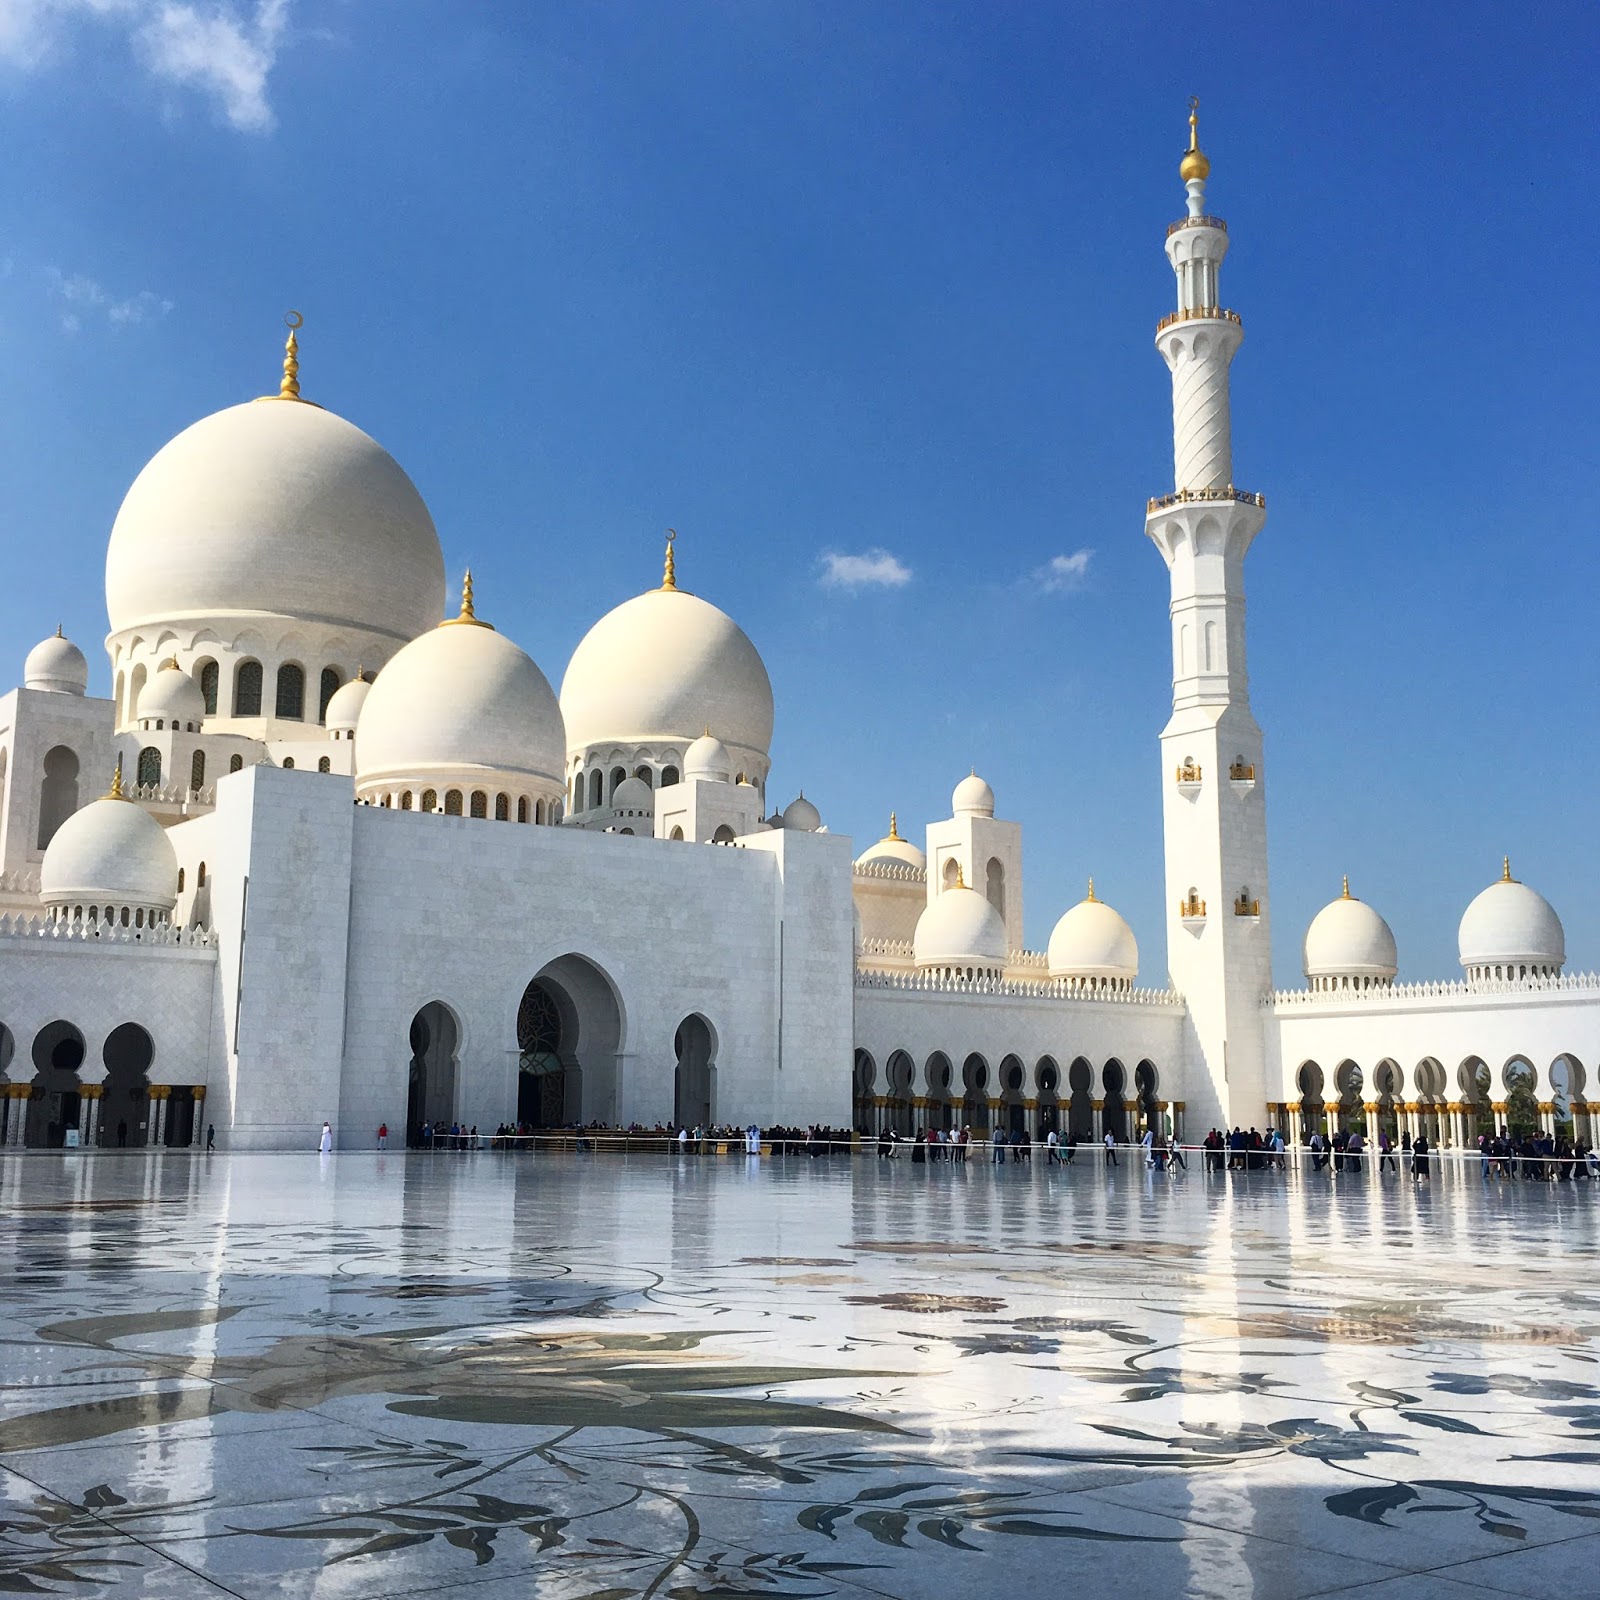 visit the sheikh zayed grand mosque